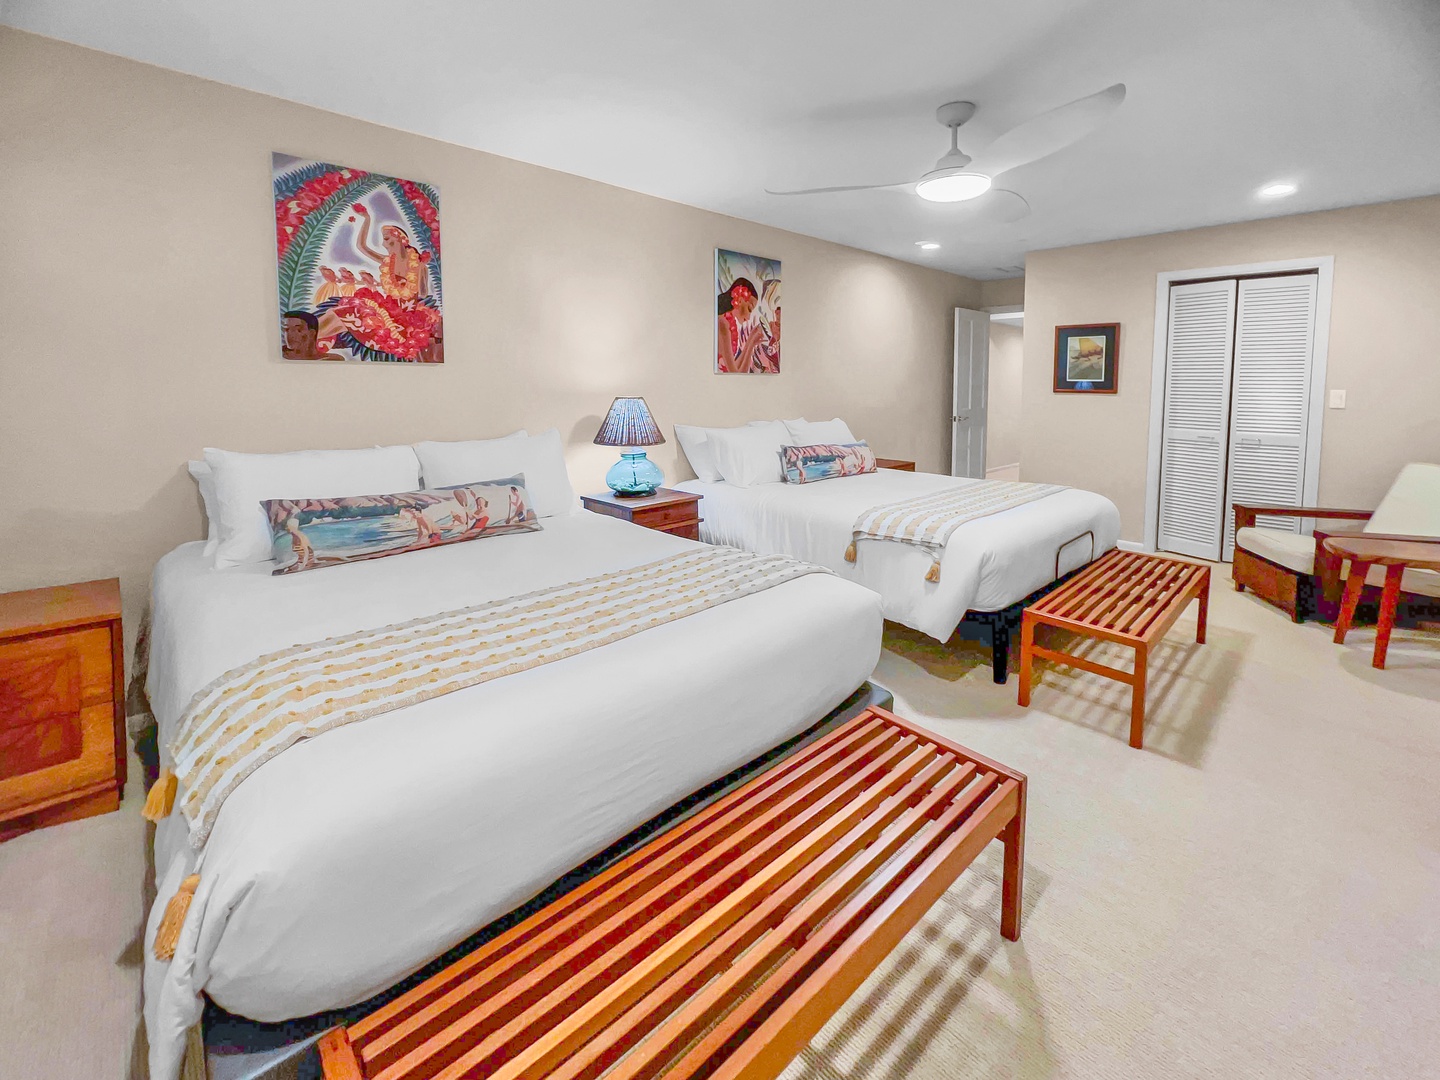 Honolulu Vacation Rentals, Hale Ola - Guest bedroom 3 offers 2 queen beds, tv and private ensuite